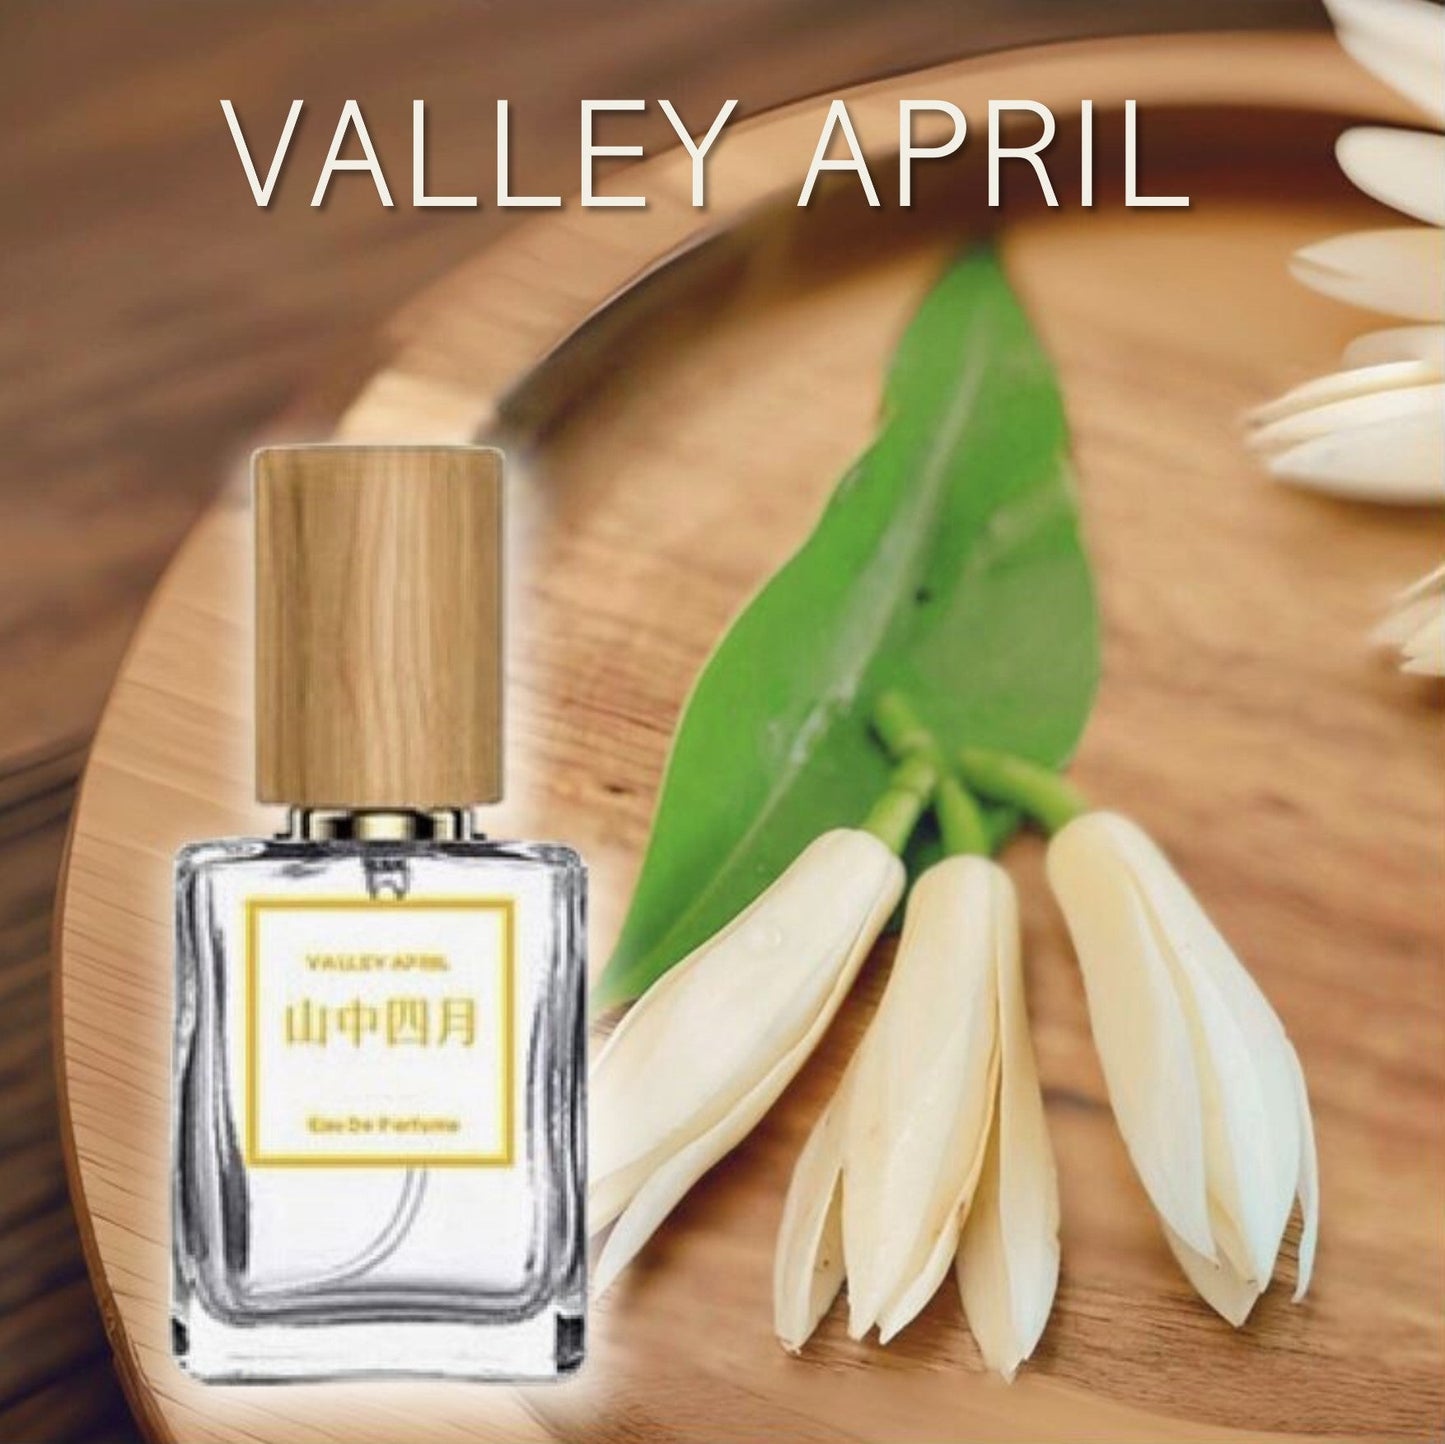 Orient White Orchid Perfume for the girl you have secretly loved for a long time-15ML